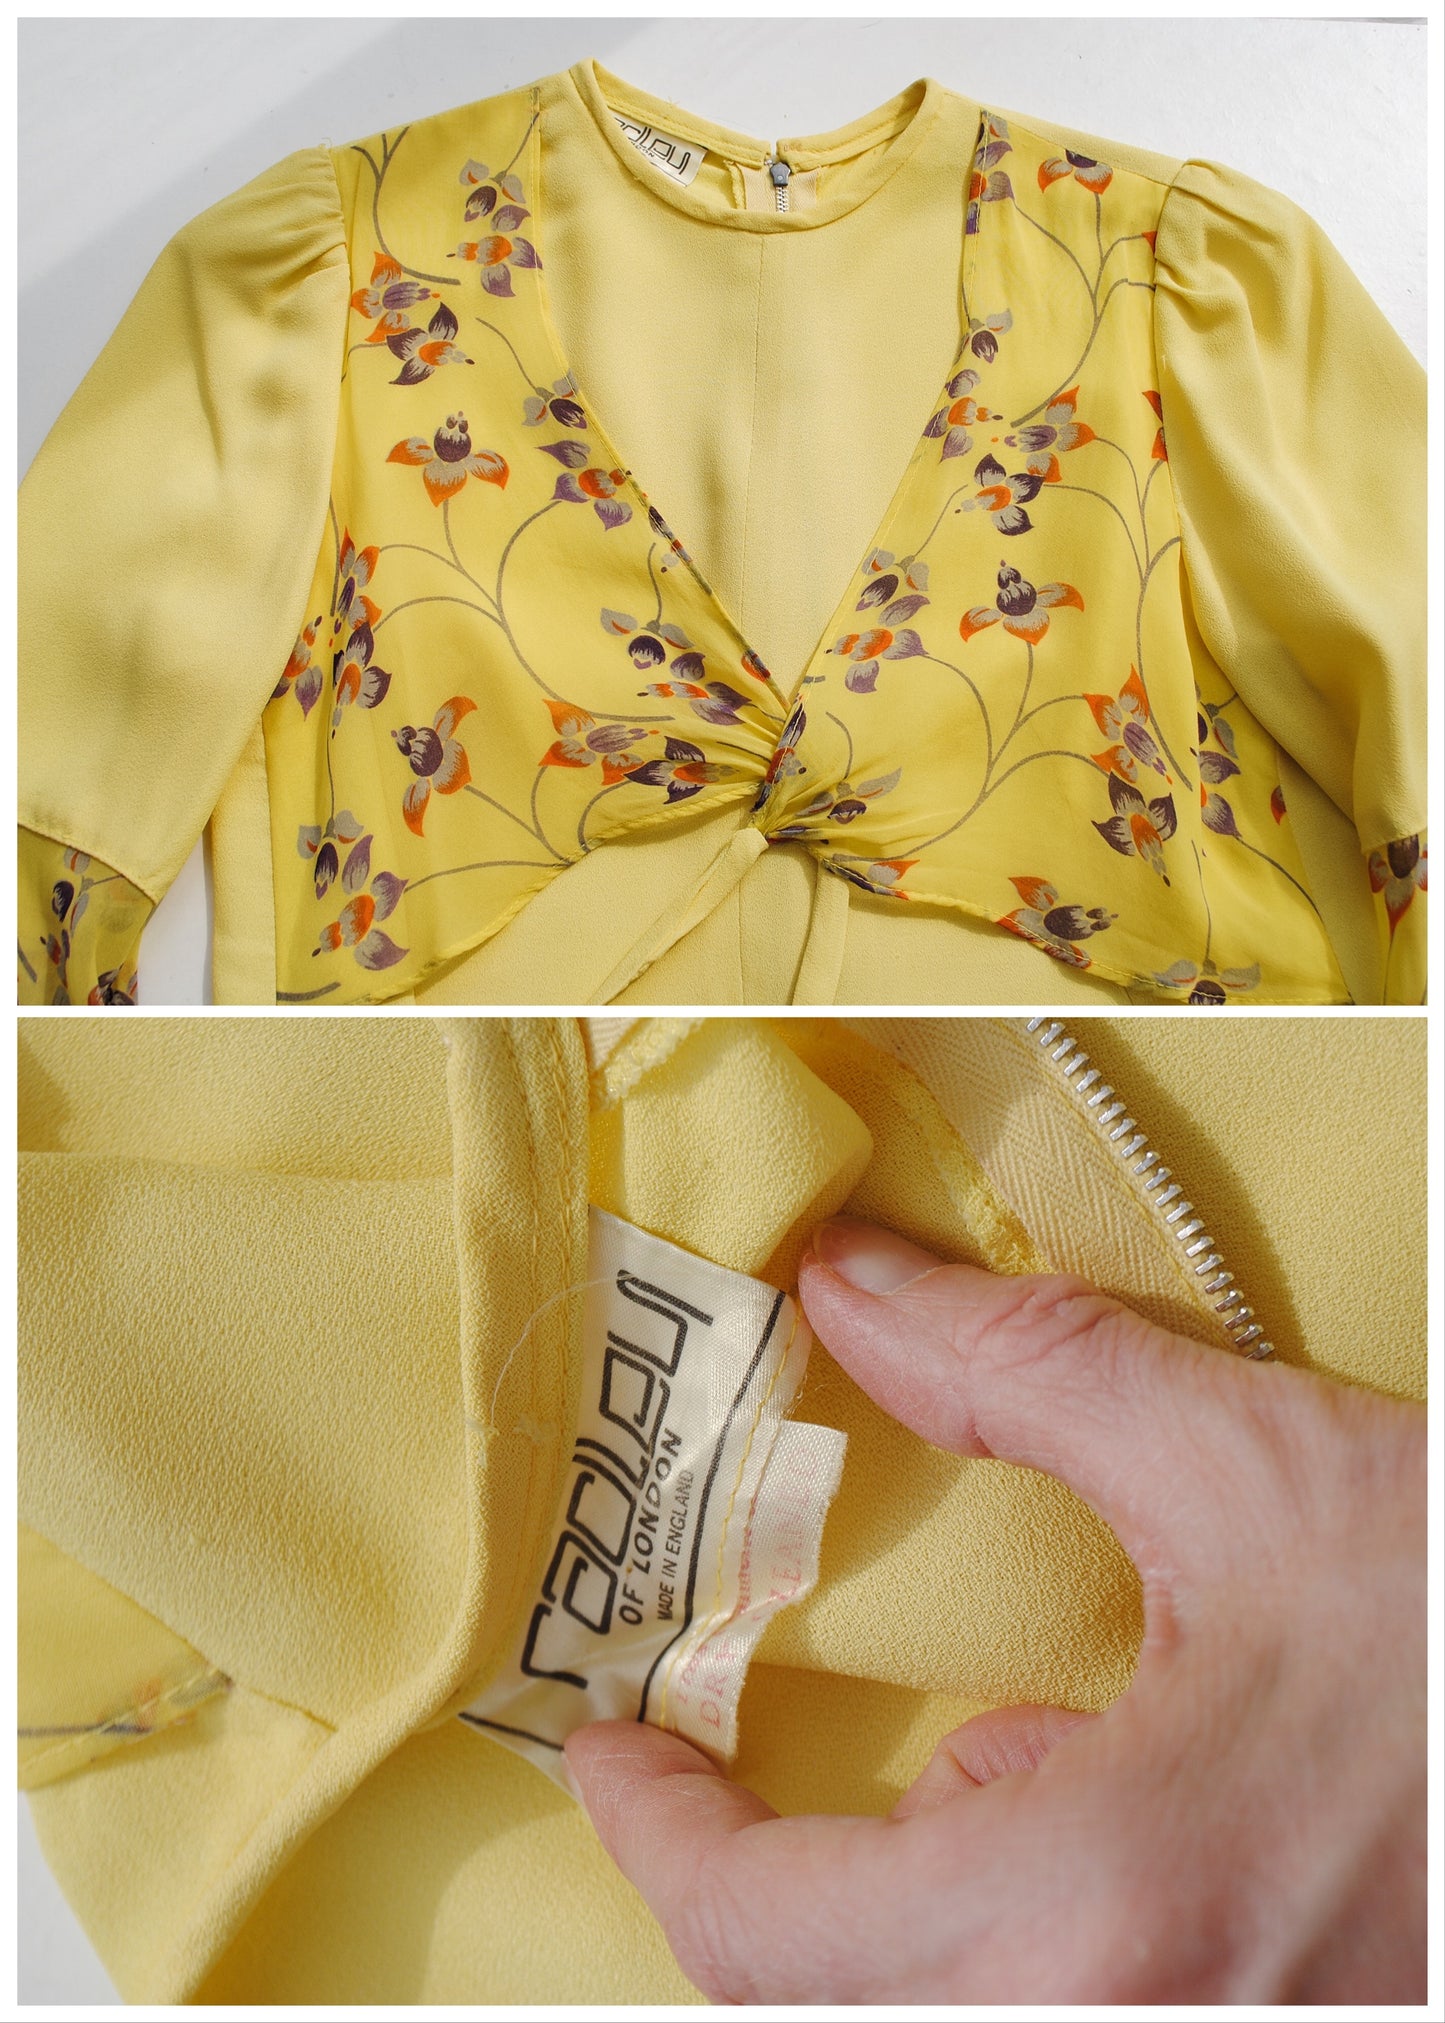 1960s Ossie style Radley Mini Dress in Yellow Crepe with Belladonna Print Sleeves